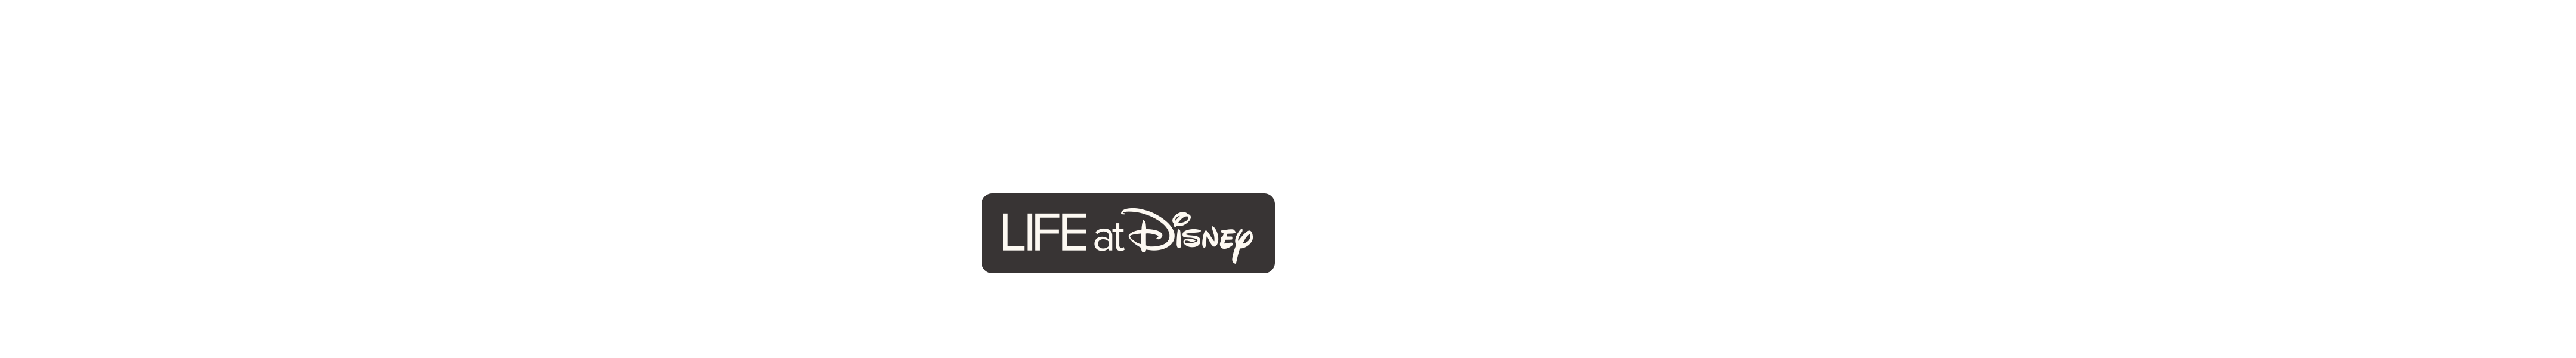 Learn More About the Life at Disney Podcast: Disney College Program Miniseries